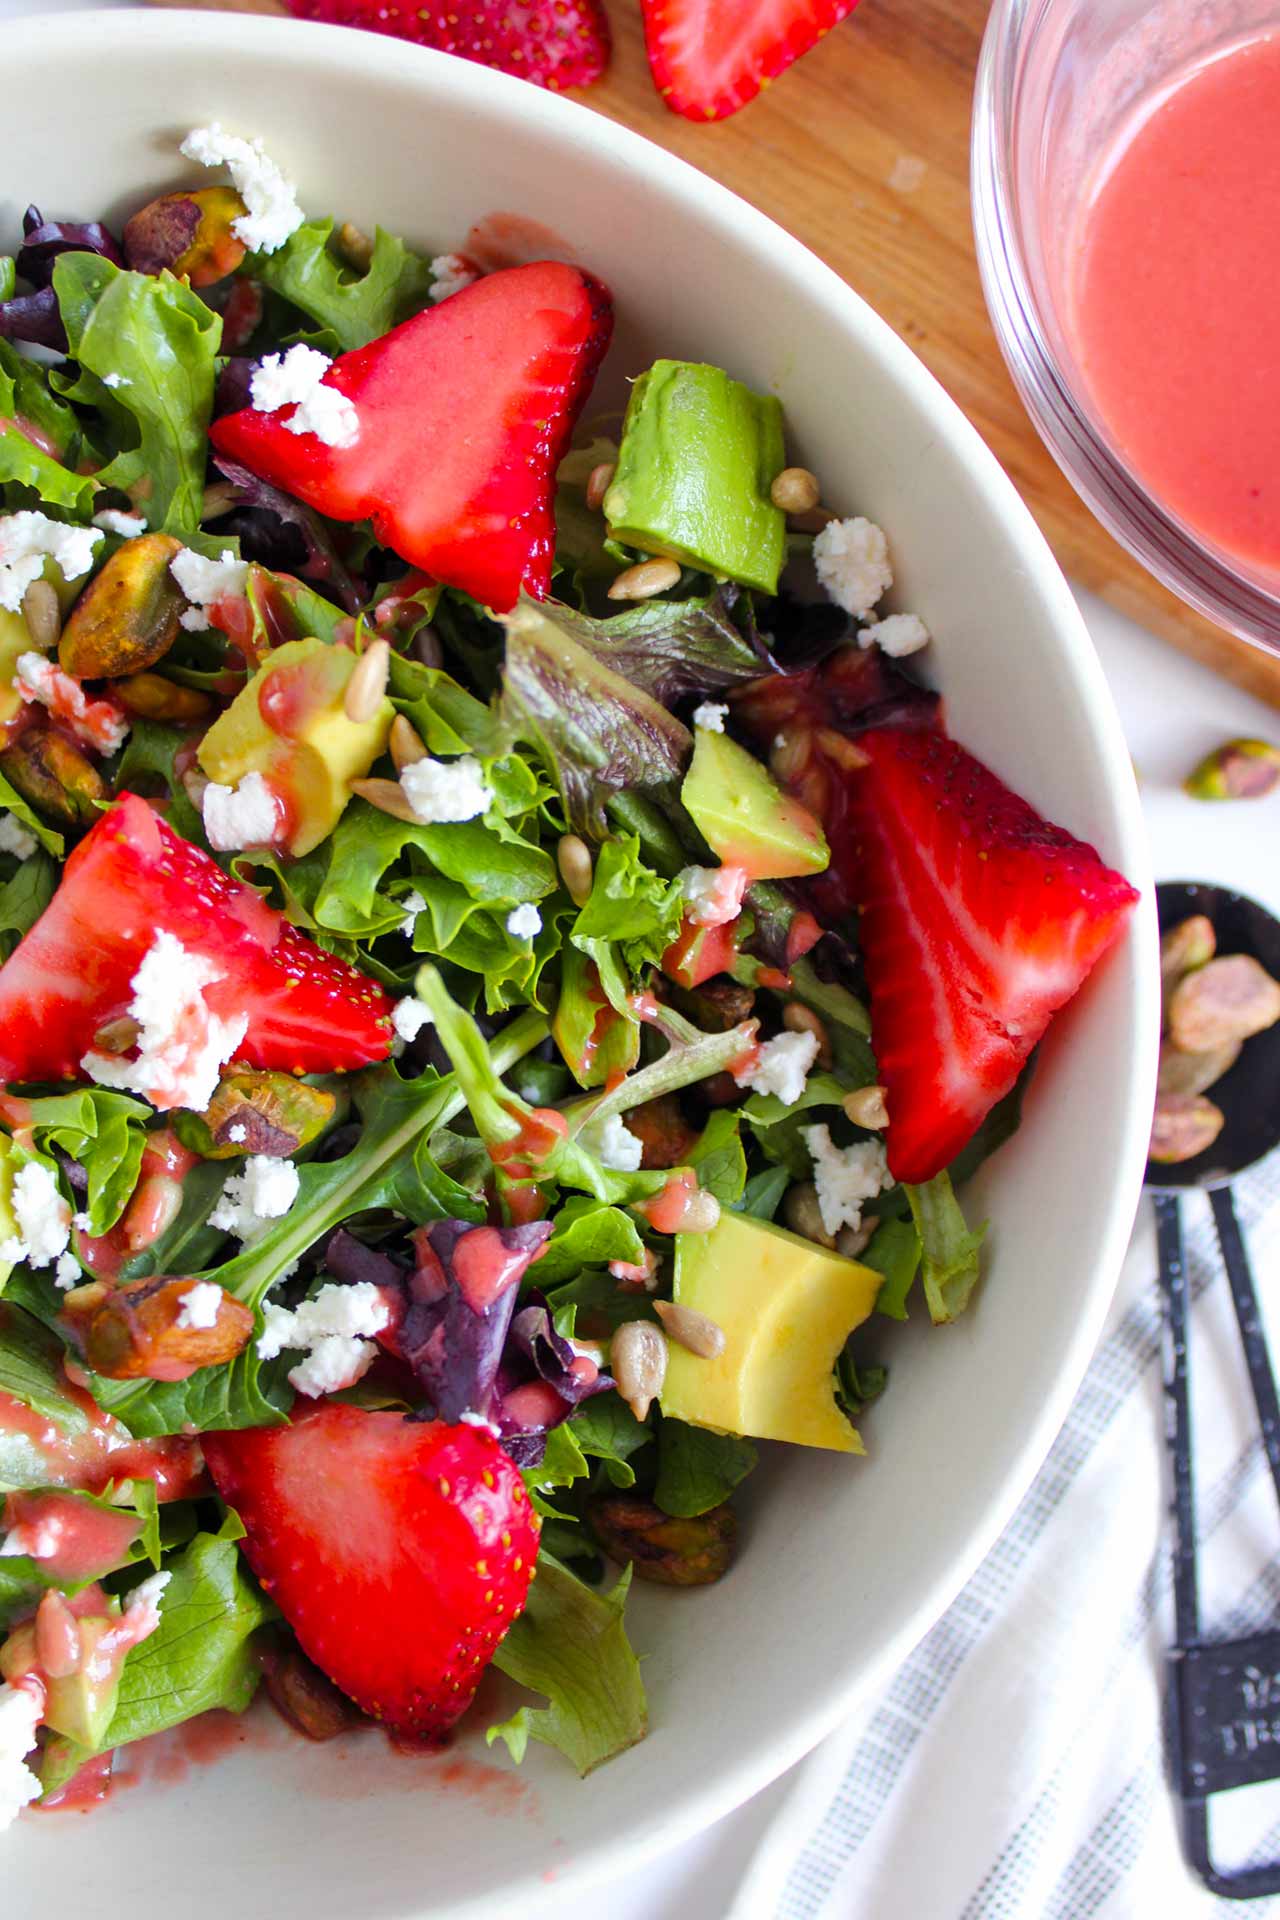 Strawberry, Pistachio, And Goat Cheese Salad With Strawberry Vinaigrette